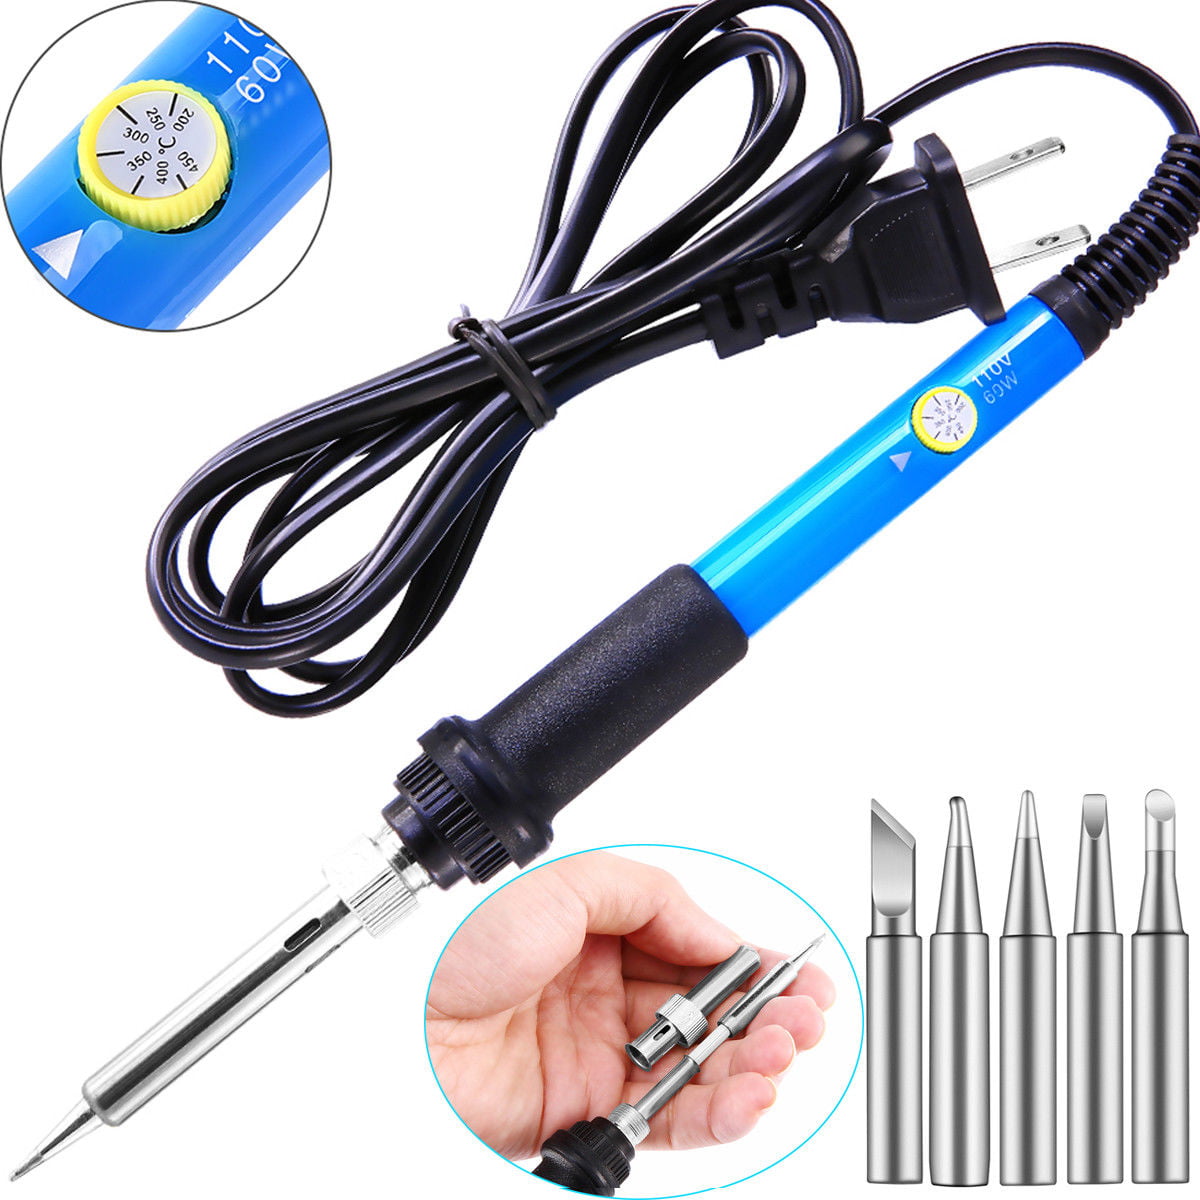 Gas Welding Torch Portable Jewelry Making Soldering Gun Hand Tools 4 Tips 